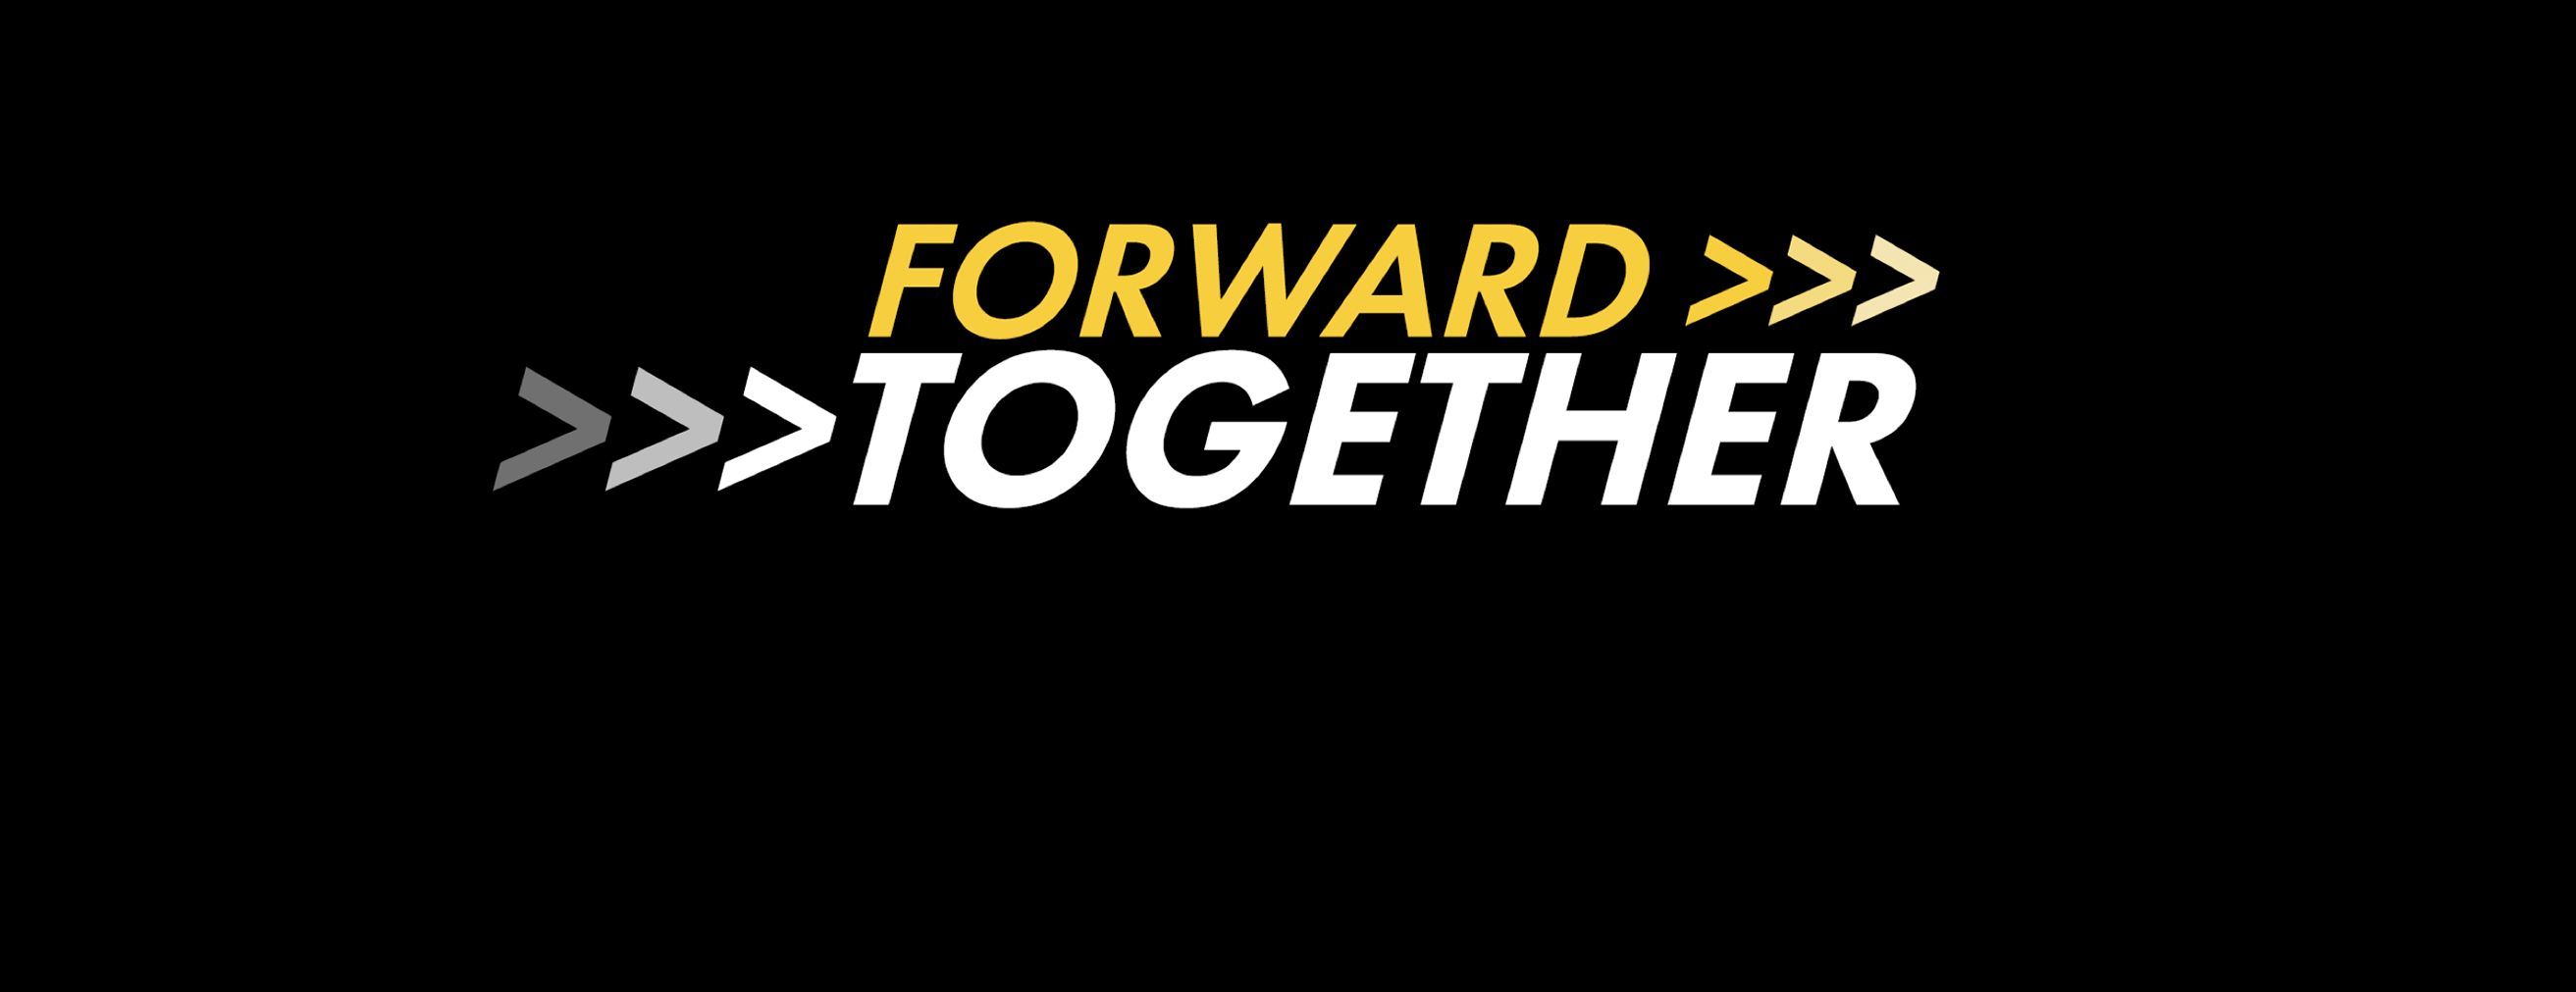 Forward Together Image Text